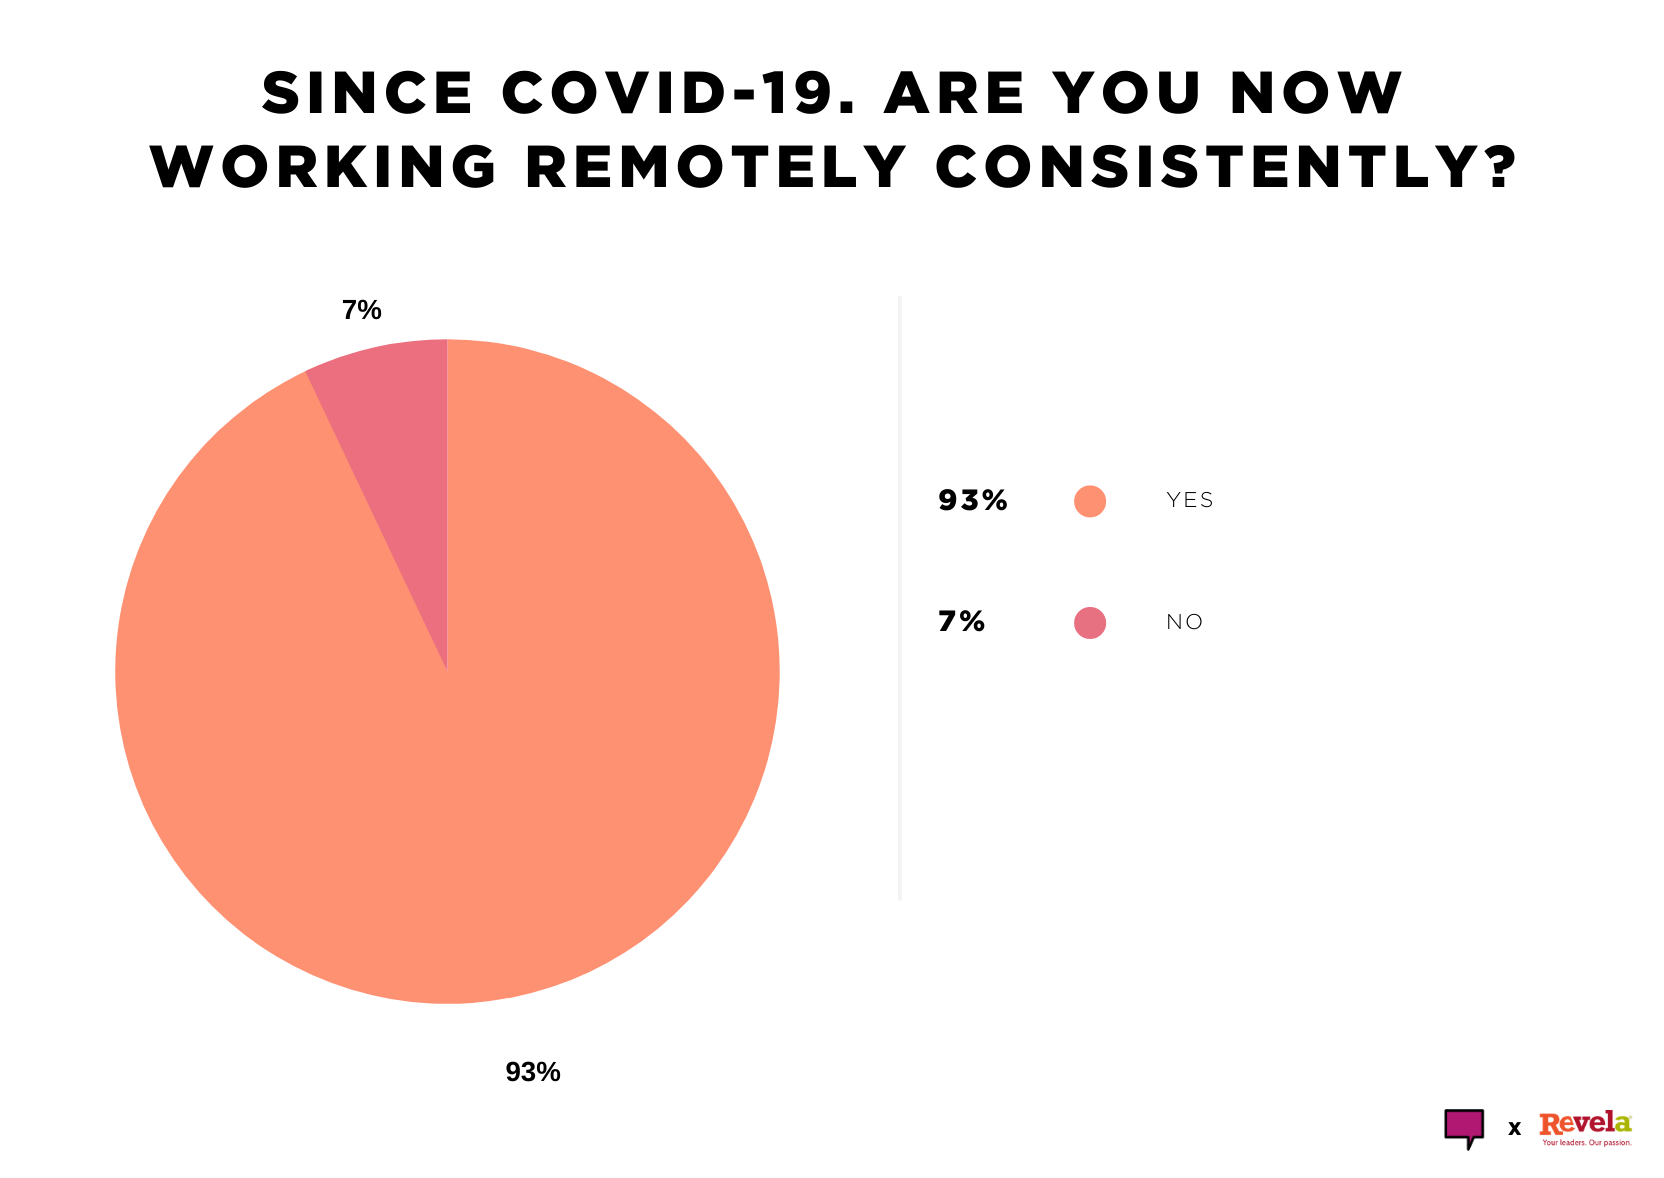 Since COVID-19, are you now working remotely consistently?